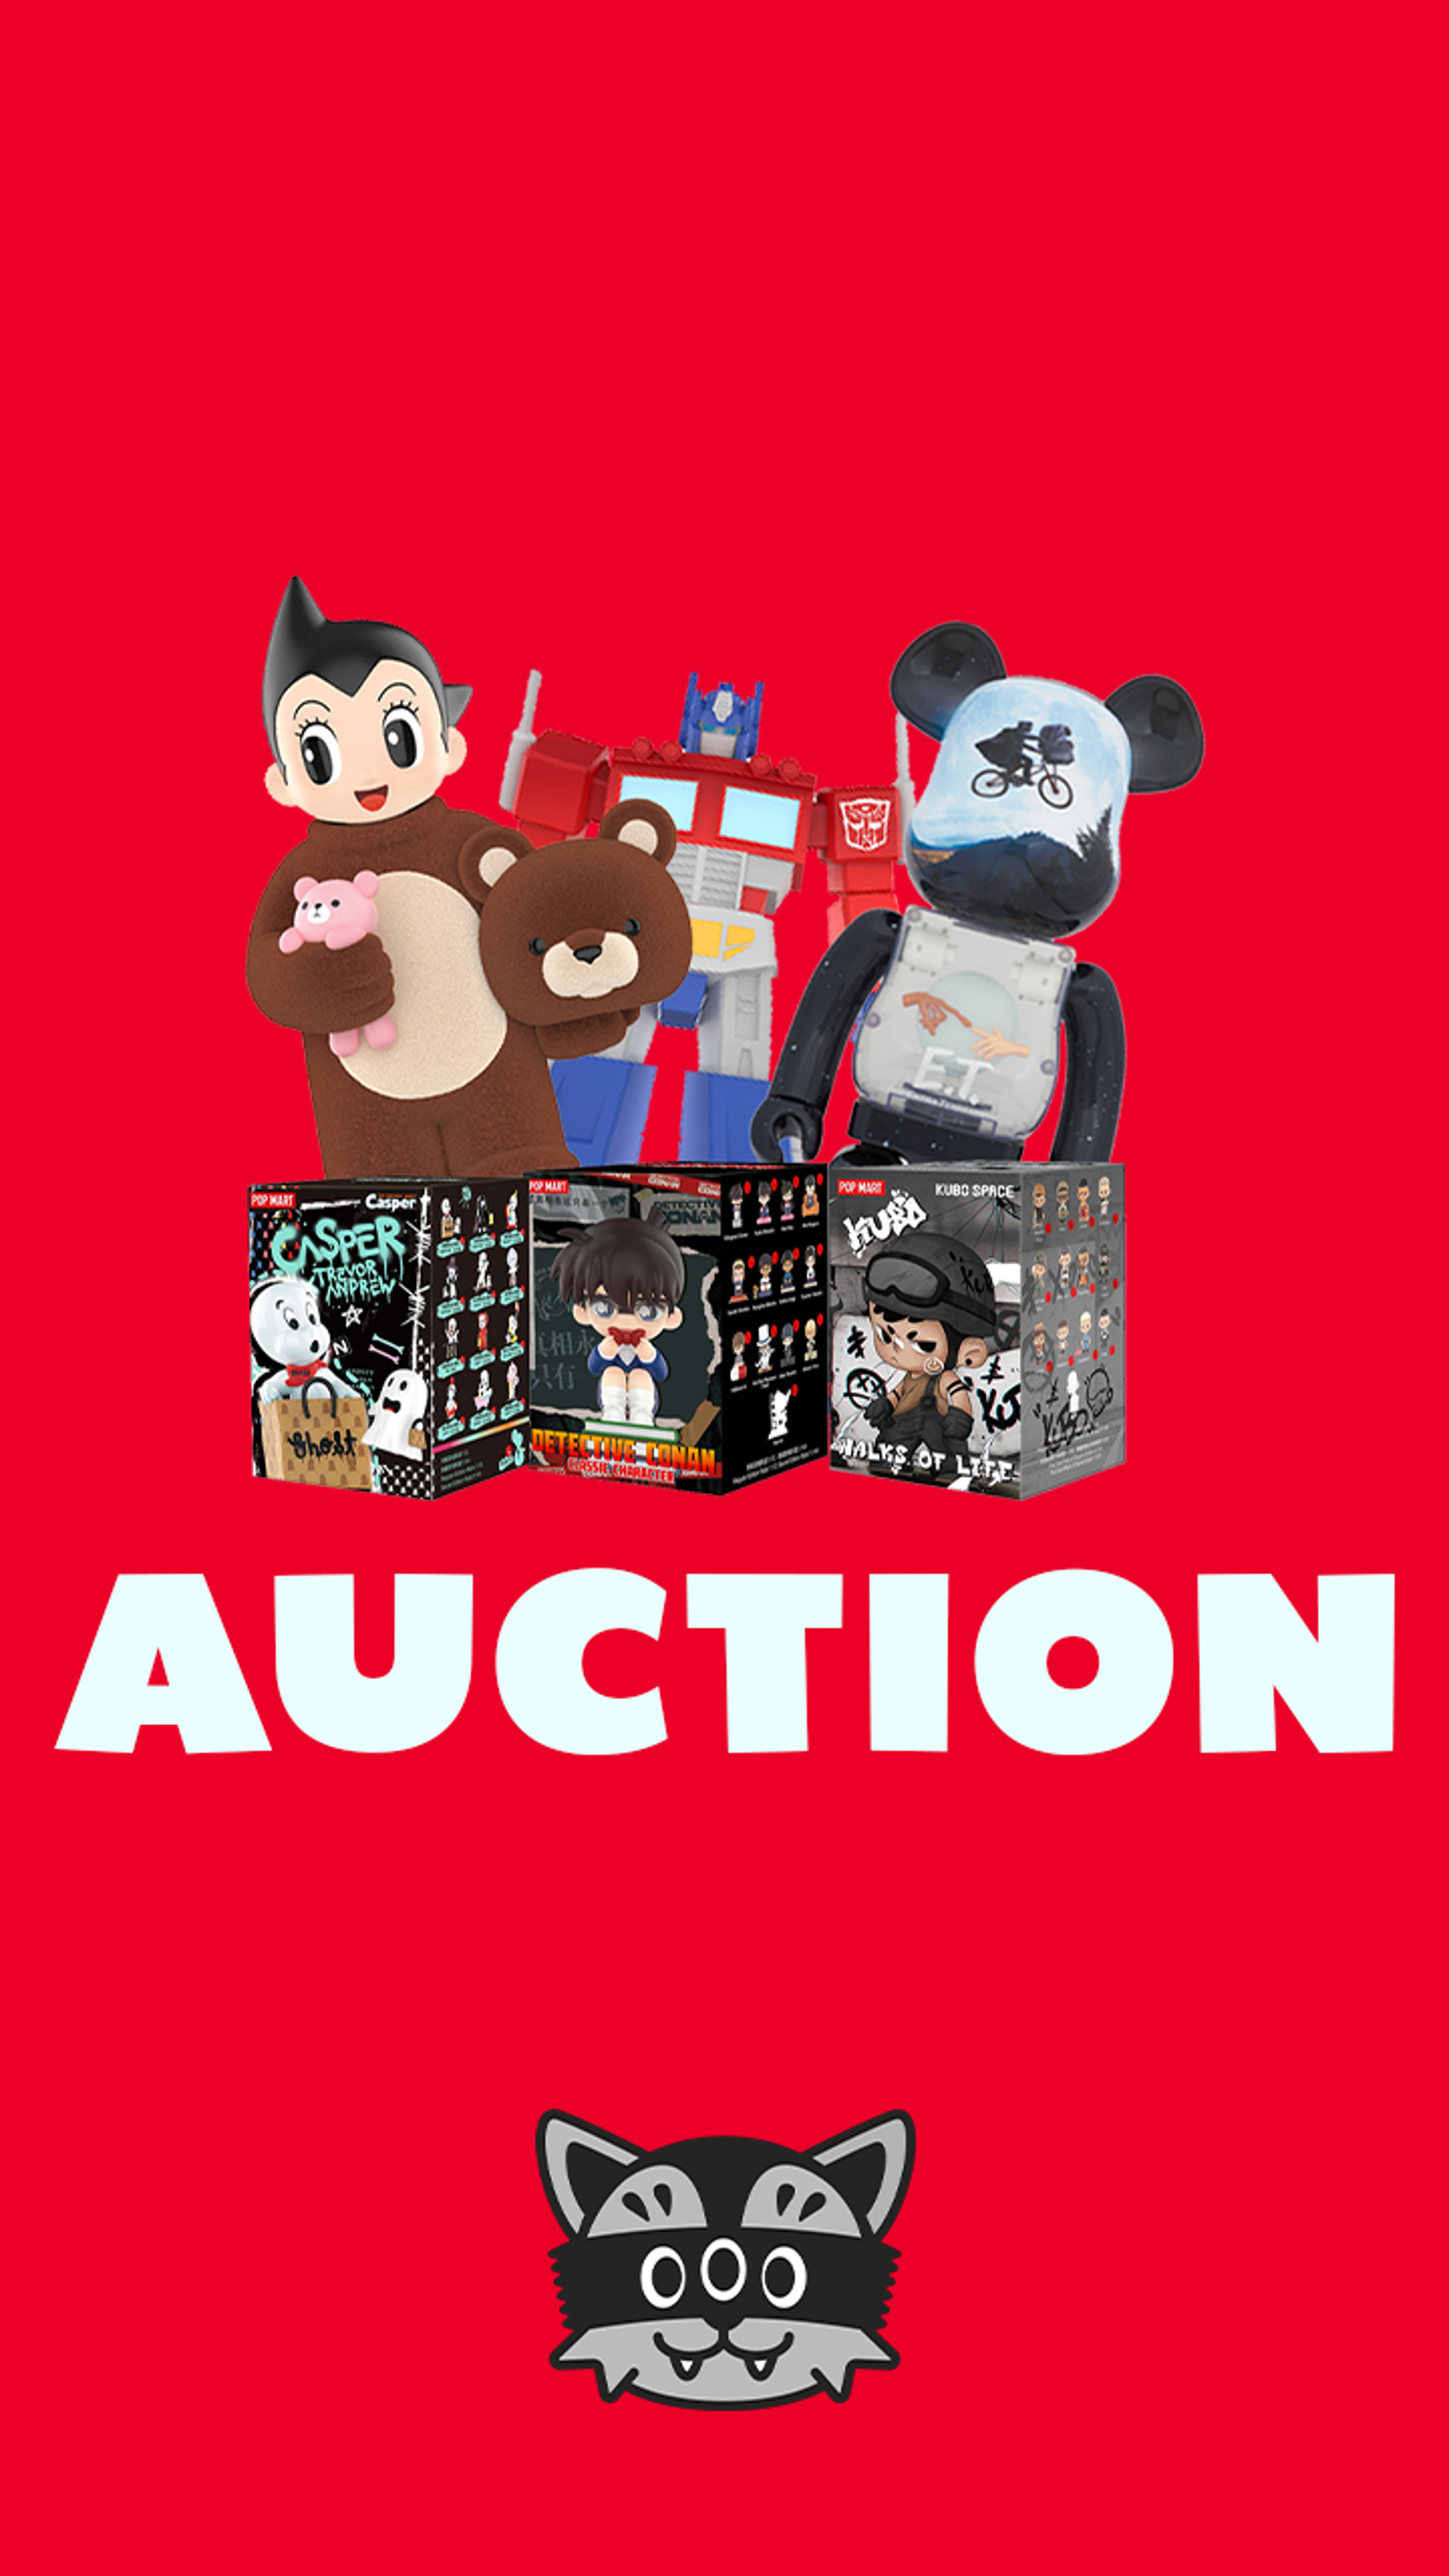 Preview image for the show titled "Mindzai Auction - April 18" at Today @ 5:00 PM